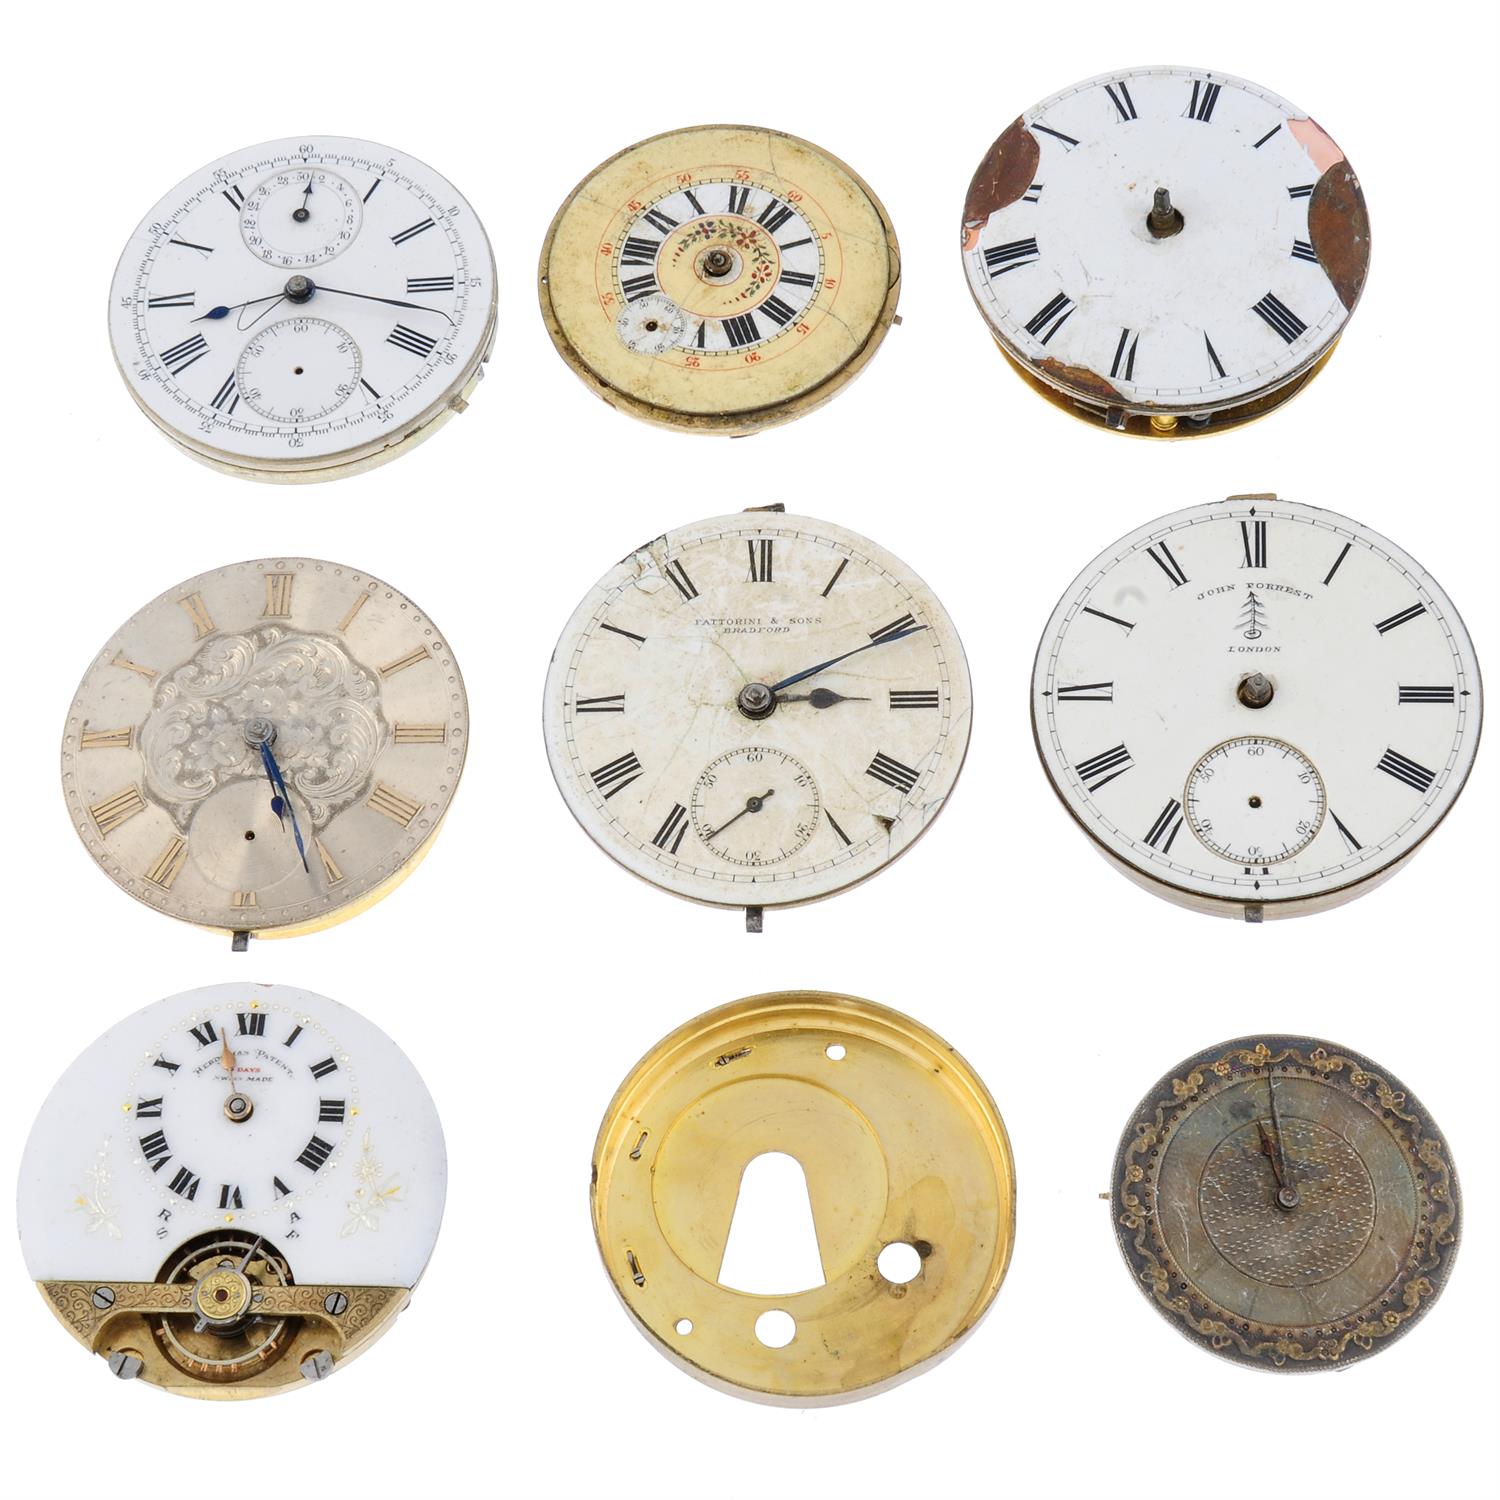 A group of watch and pocket watch movements.